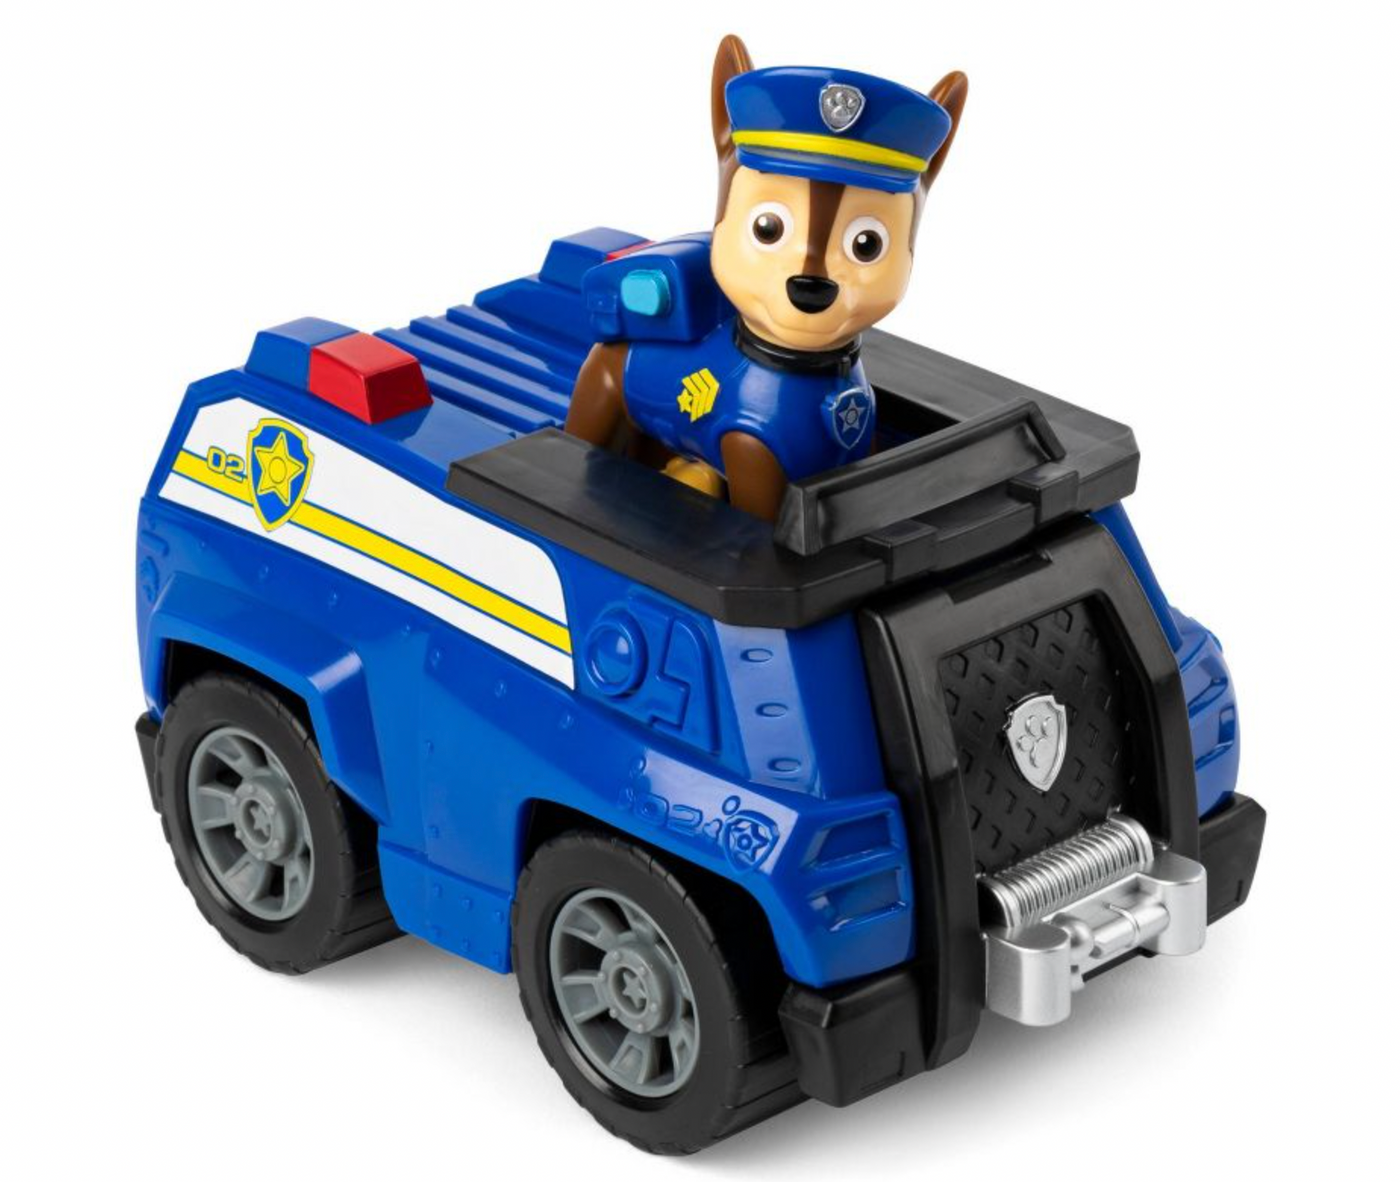 PAW Patrol Cruiser Vehicle with Chase Toy Set New with Box